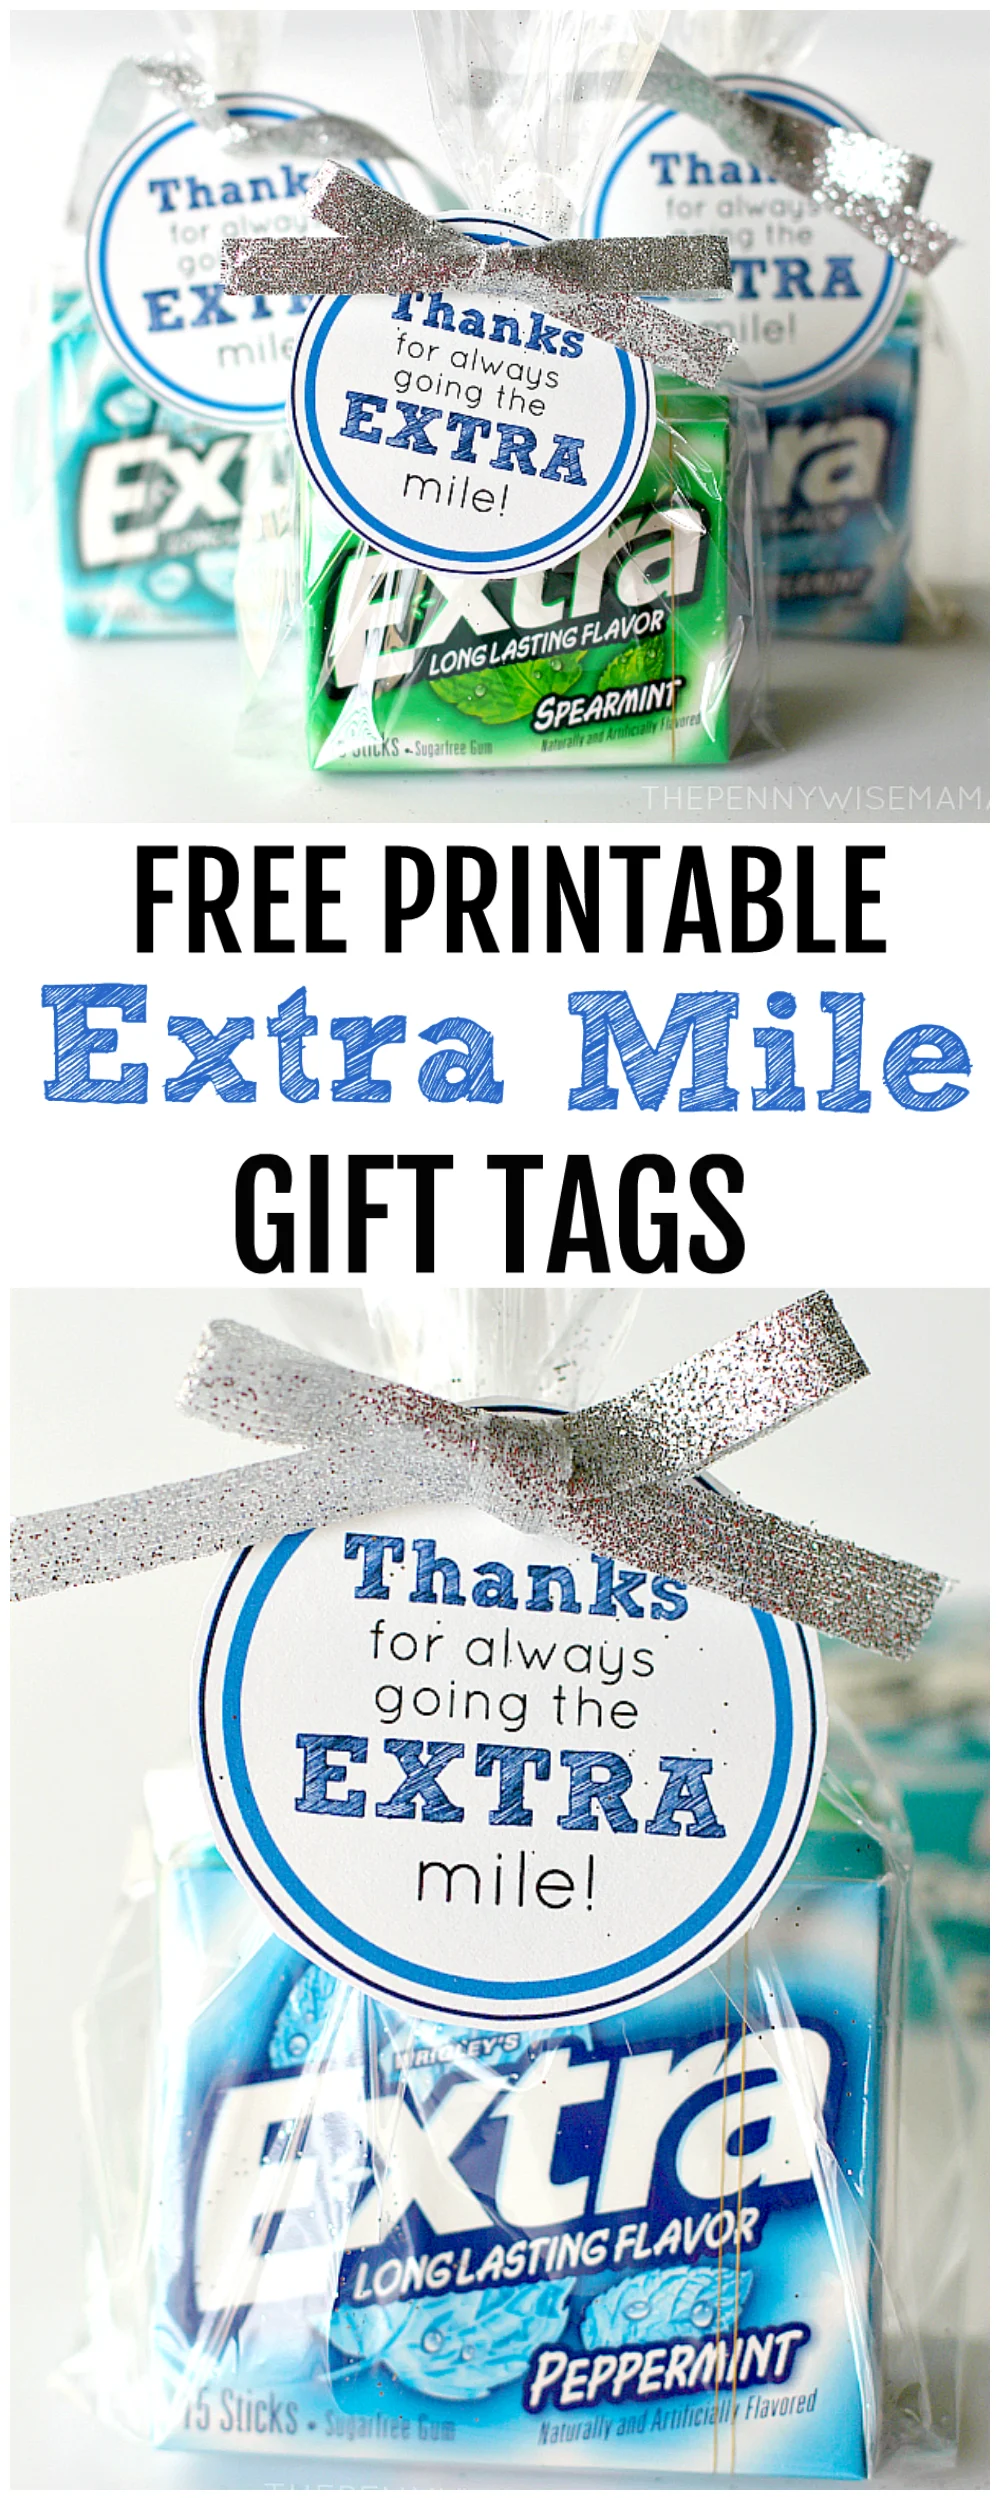 Give Extra This Holiday Season Gift Idea Free Printable The Pennywisemama